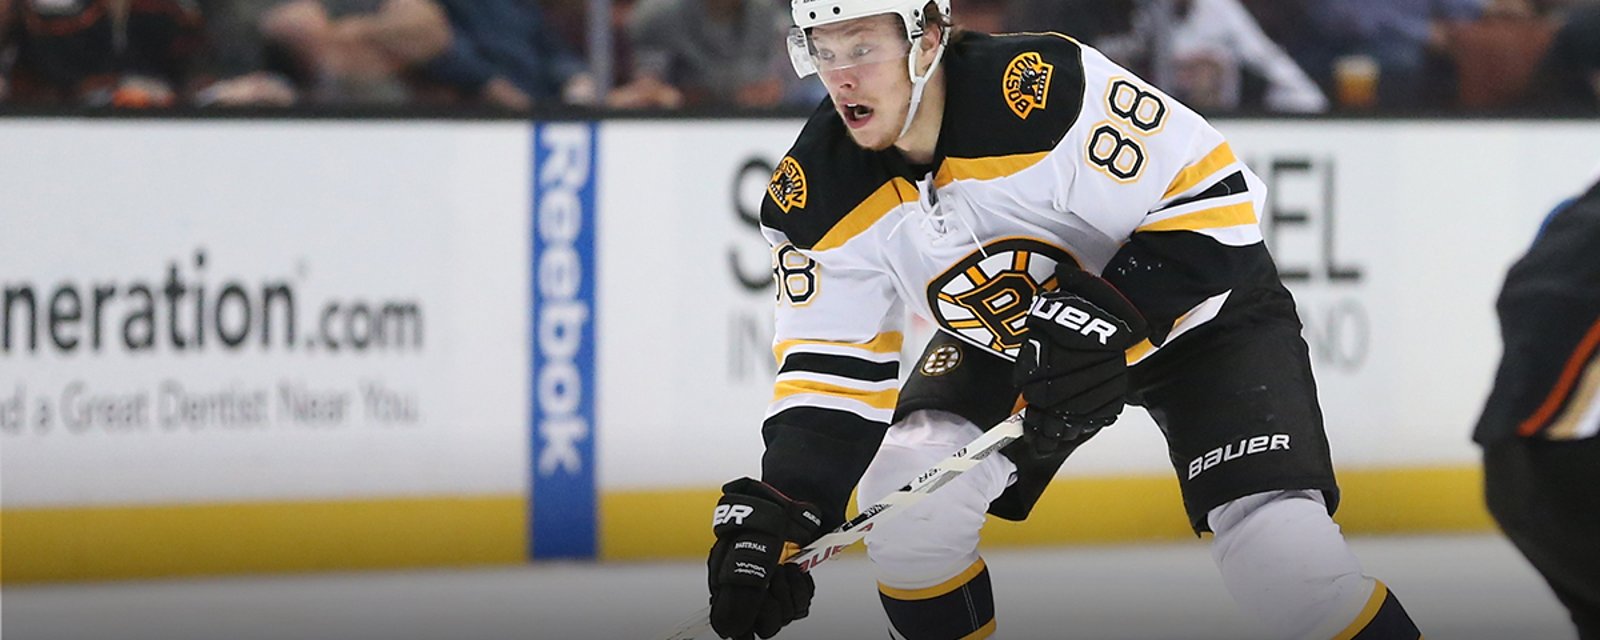 Report: Pastrnak unhappy with Bruins negotiations